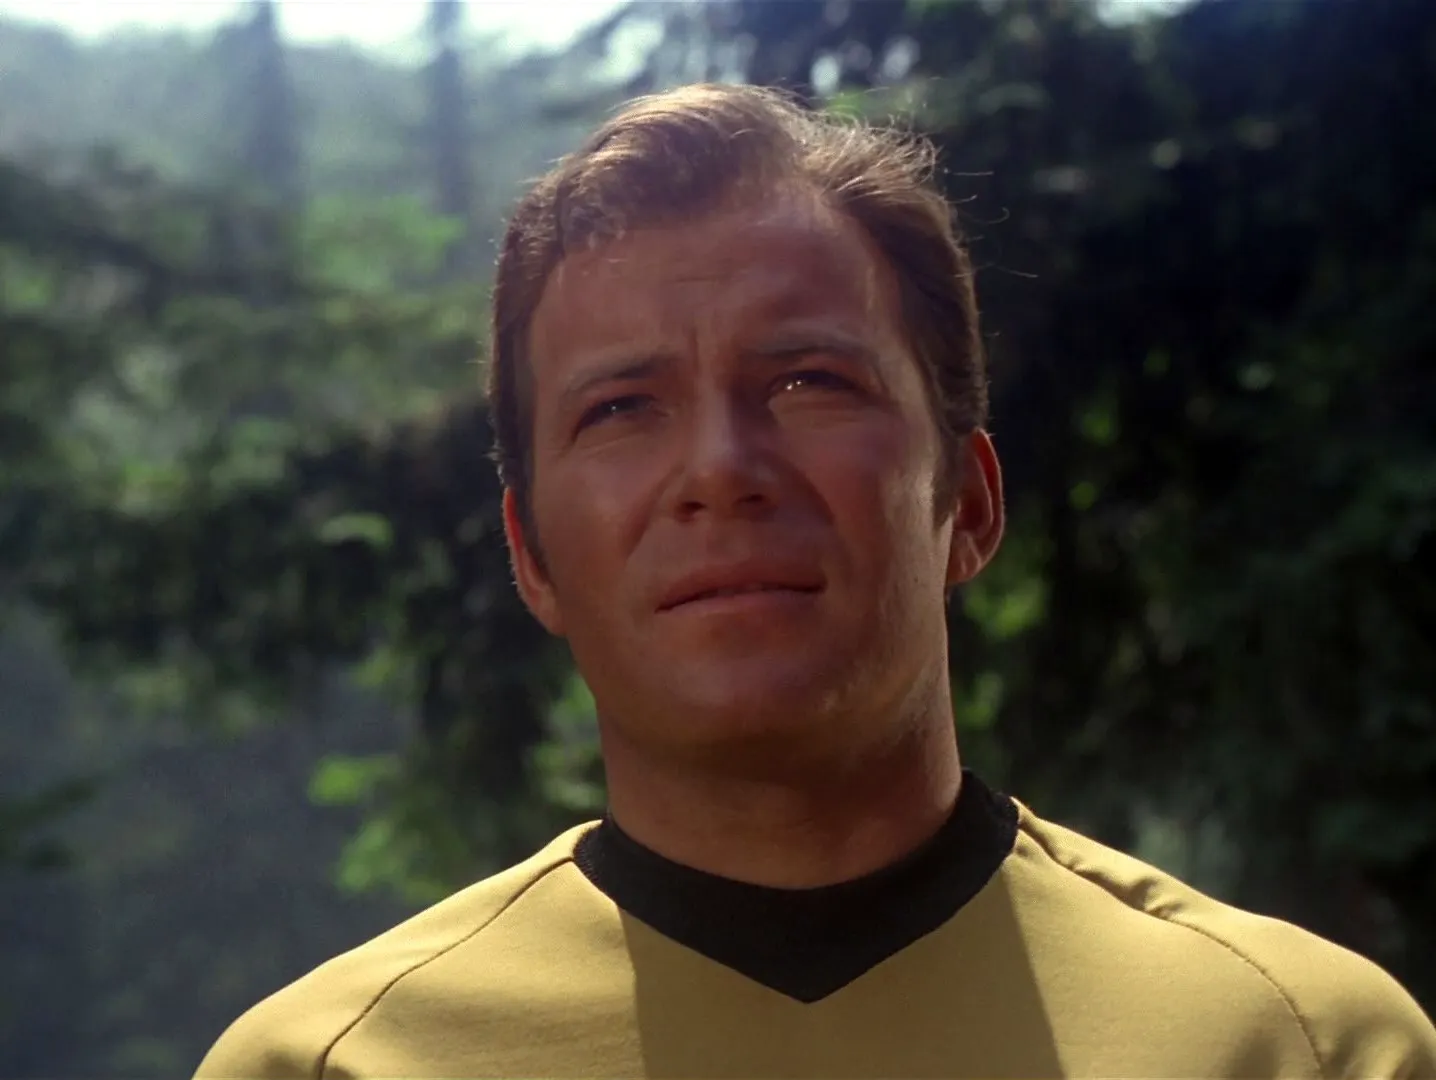 What did William Shatner do at Summer Camp?